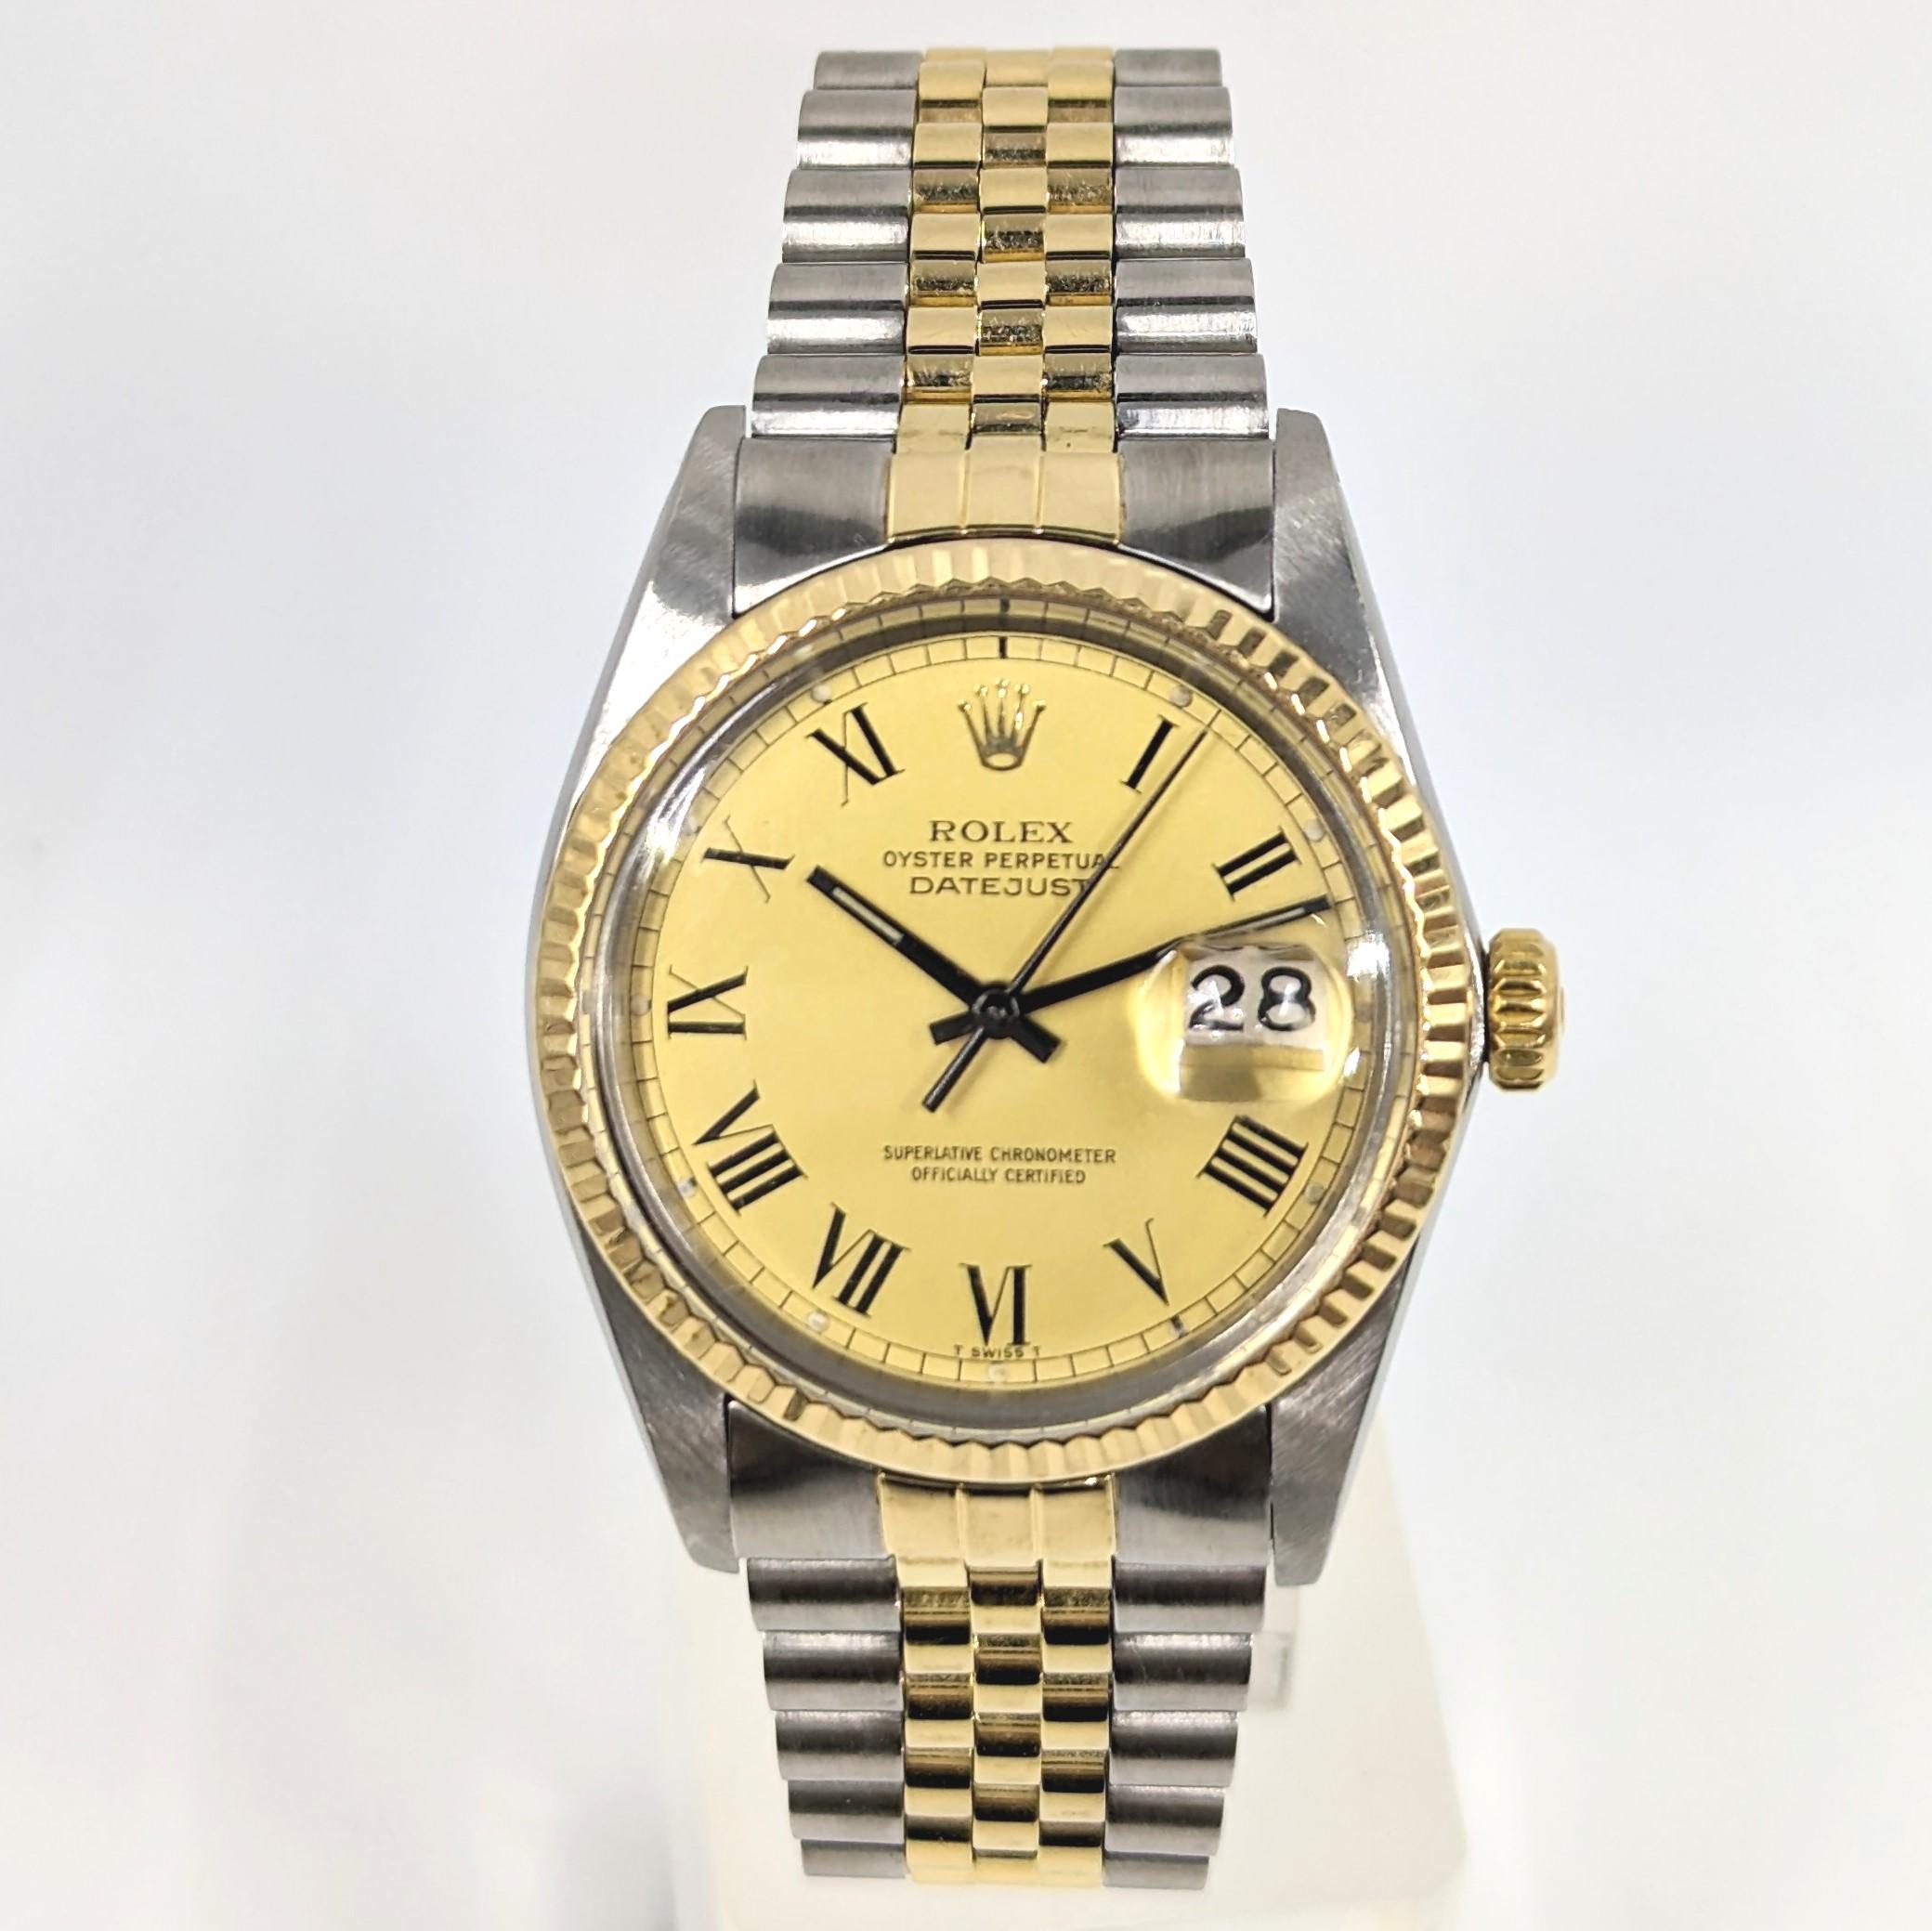 Rolex Oyster Perpetual Datejust 18k/SS YG 2tone Watch Collectible Buckley 16013 In Good Condition For Sale In Richmond, CA